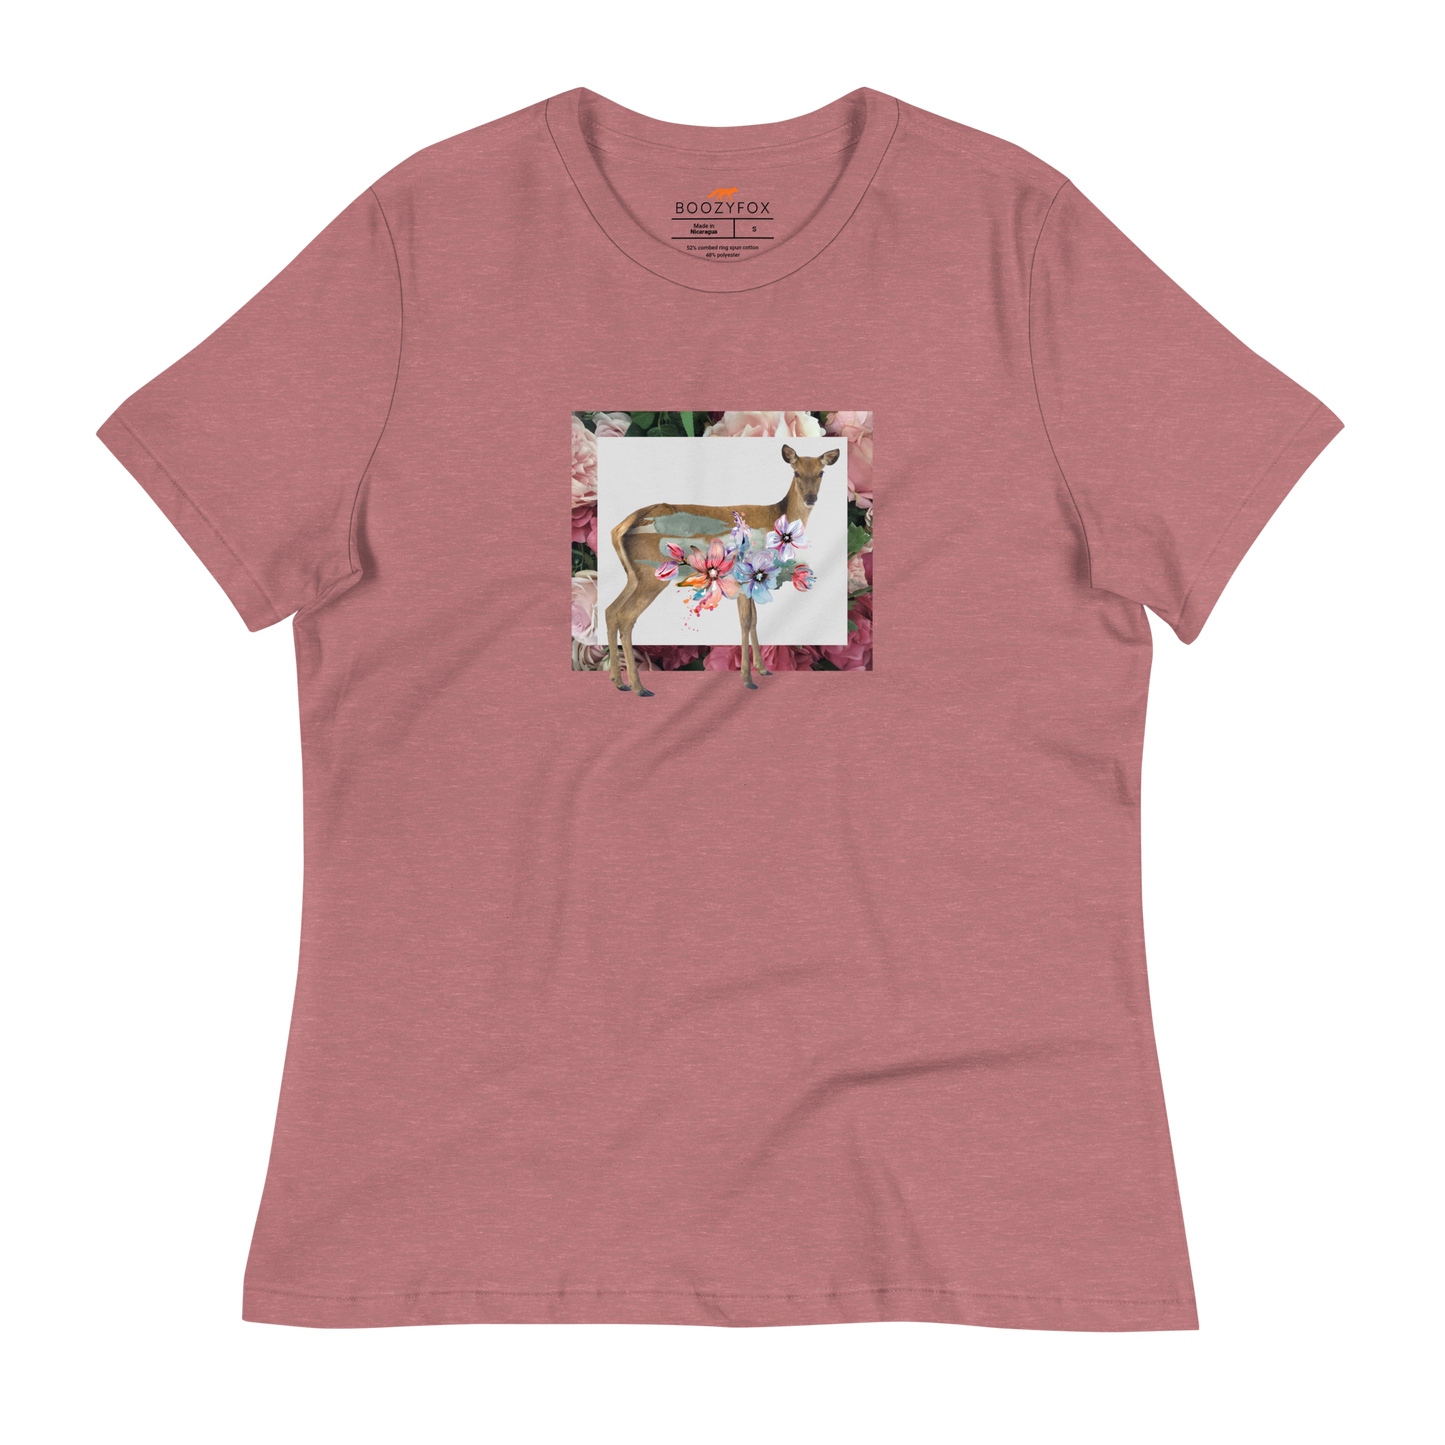 Women's relaxed heather mauve Deer t-shirt featuring a captivating Floral Deer graphic on the chest - Women's Graphic Deer Tees - Boozy Fox